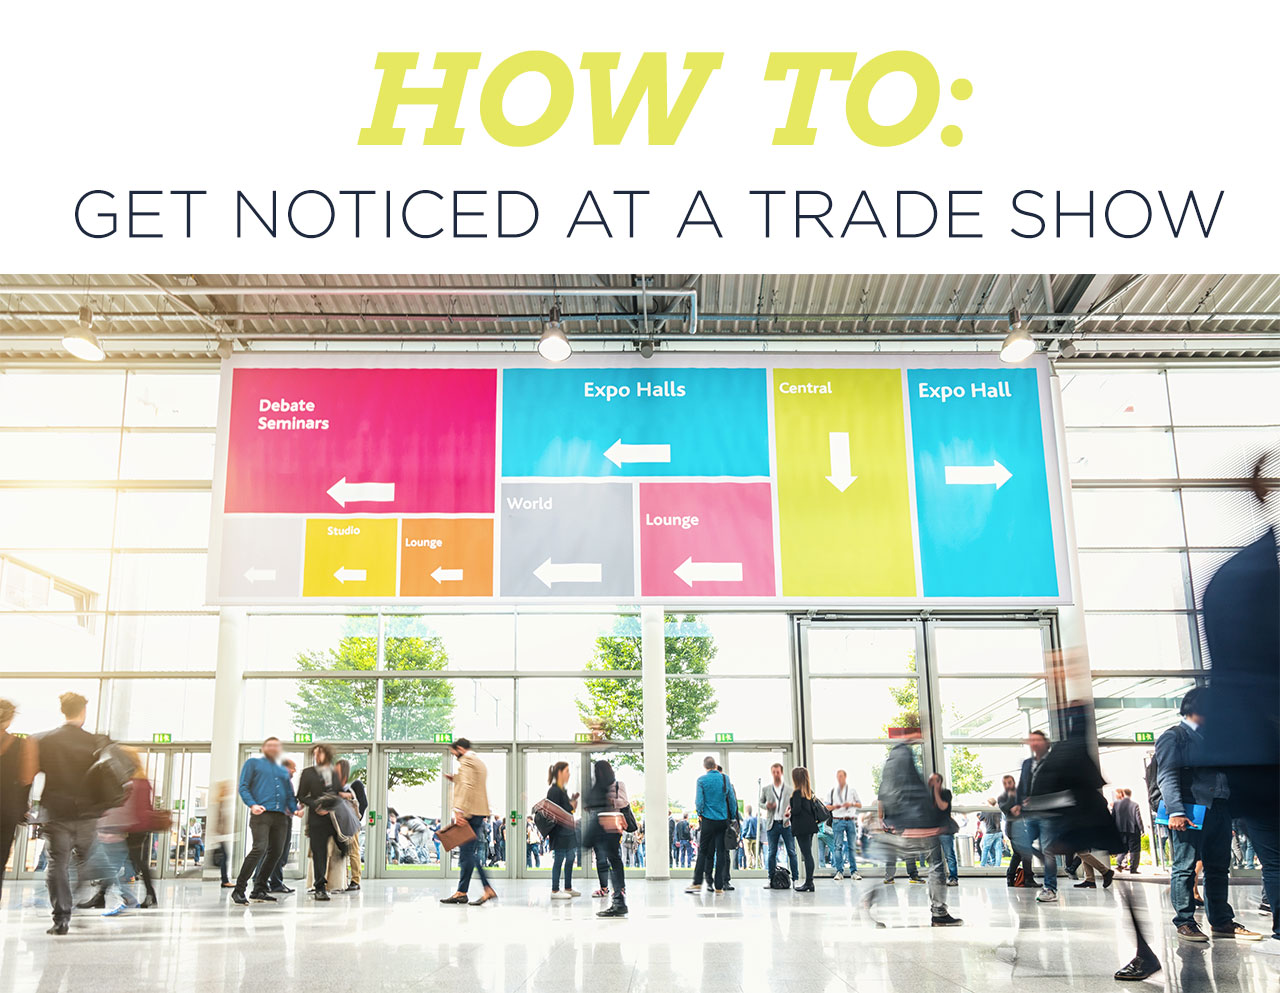 HOW TO: GET NOTICED AT A TRADE SHOW